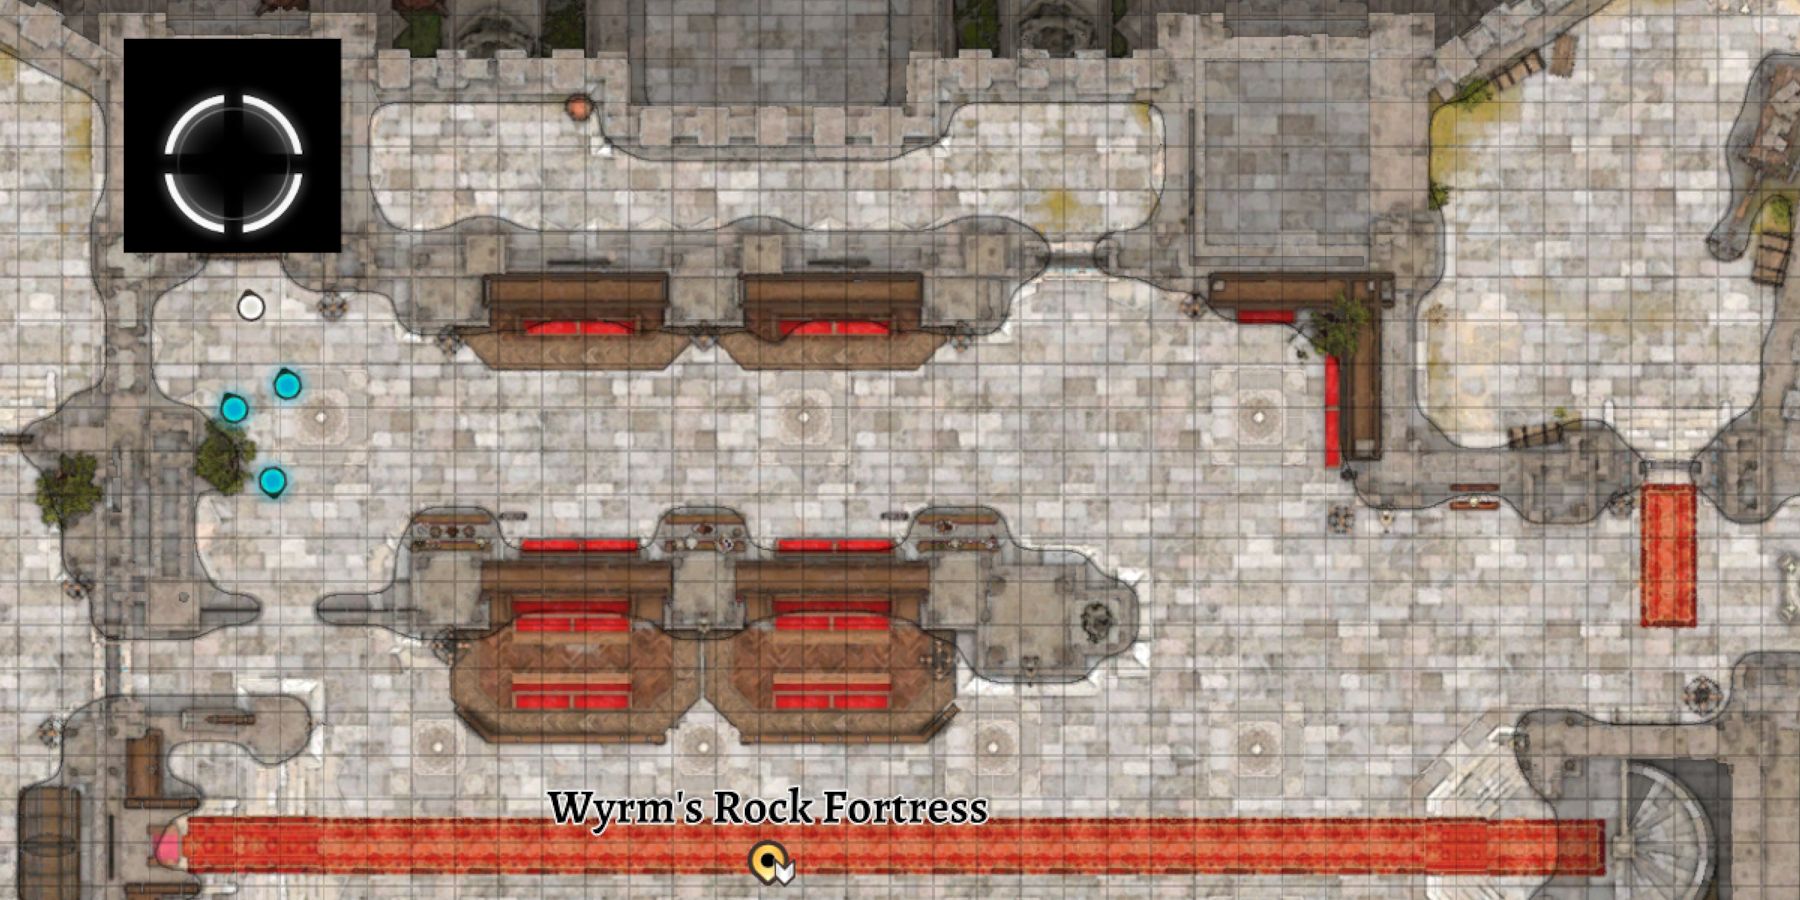 The map has a black square where the passageway leads to the top of the fortress.